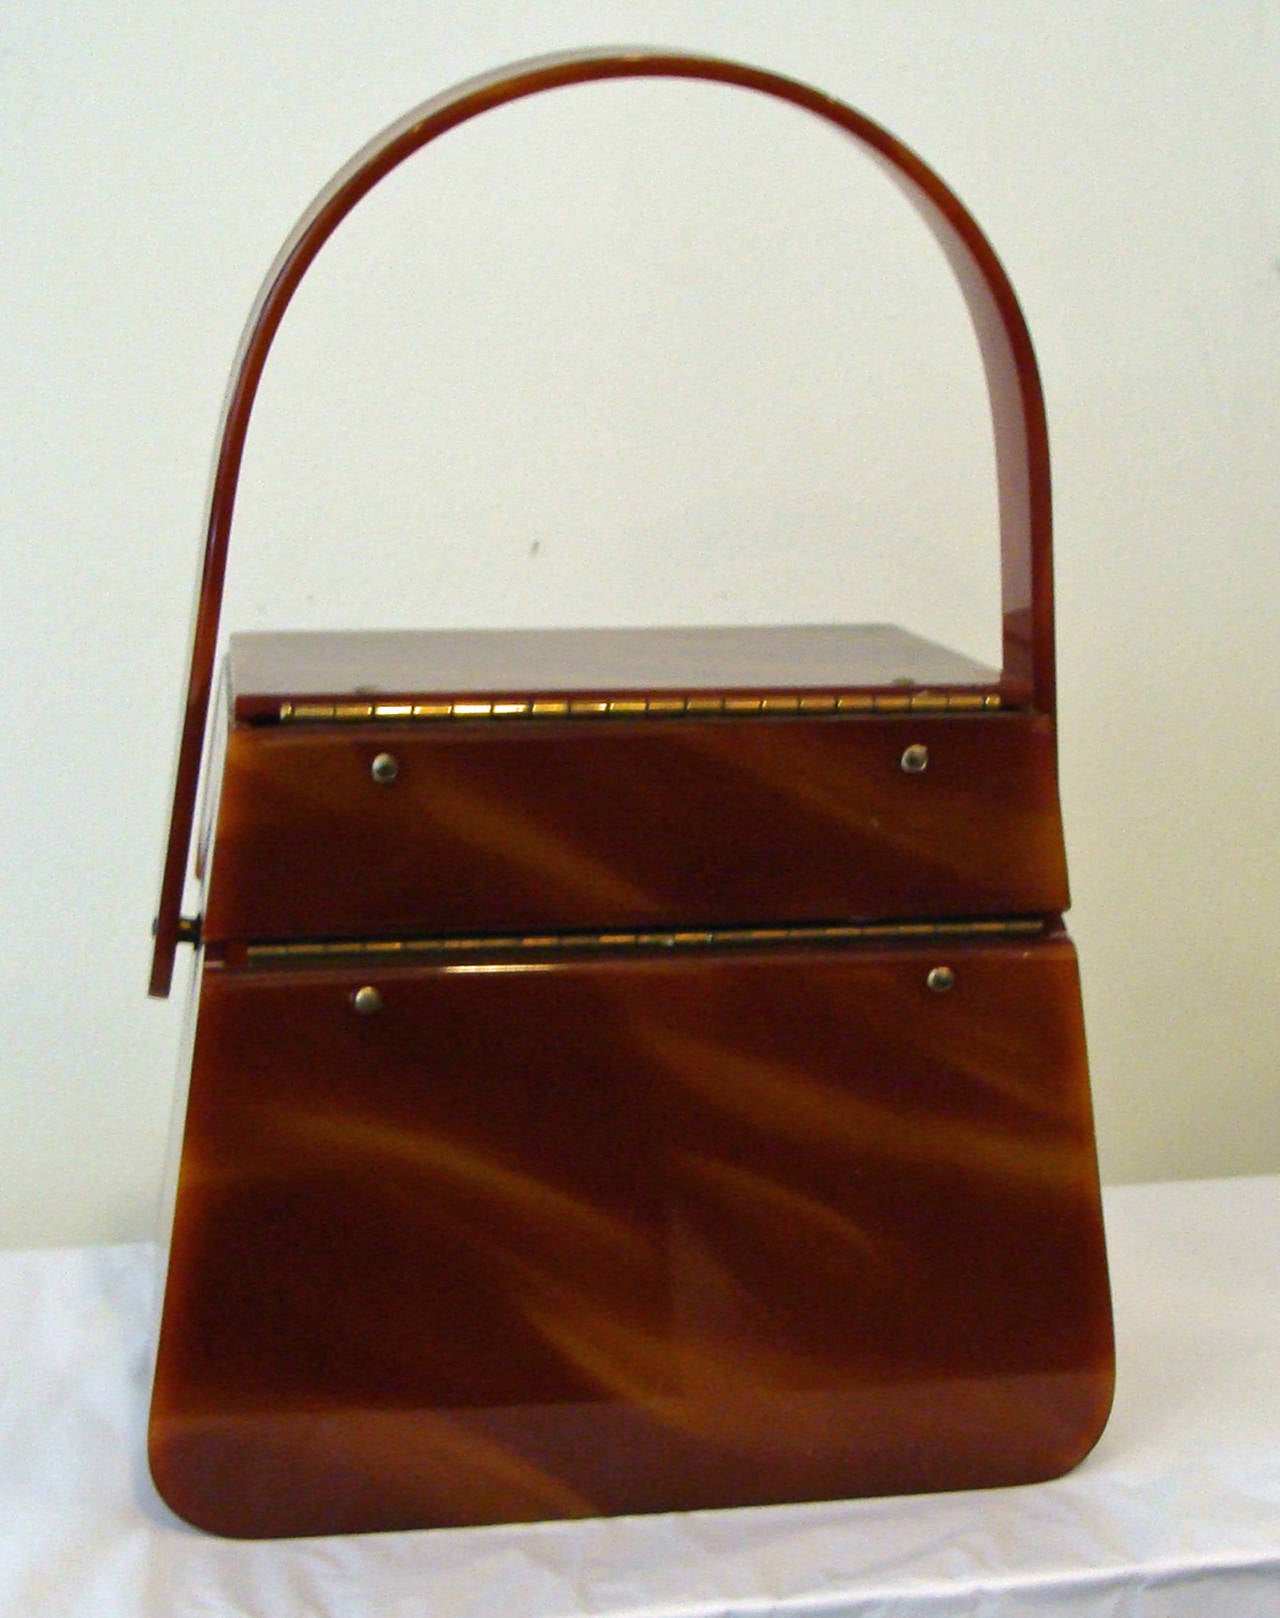 This rare and lovely Lucite purse is made of a rich tortoise style Lucite.  The  purse was produced by well-known Wilardy Originals has a single handle and sleek design.  

This bag was recently consigned to our gallery by a local Bucks County,